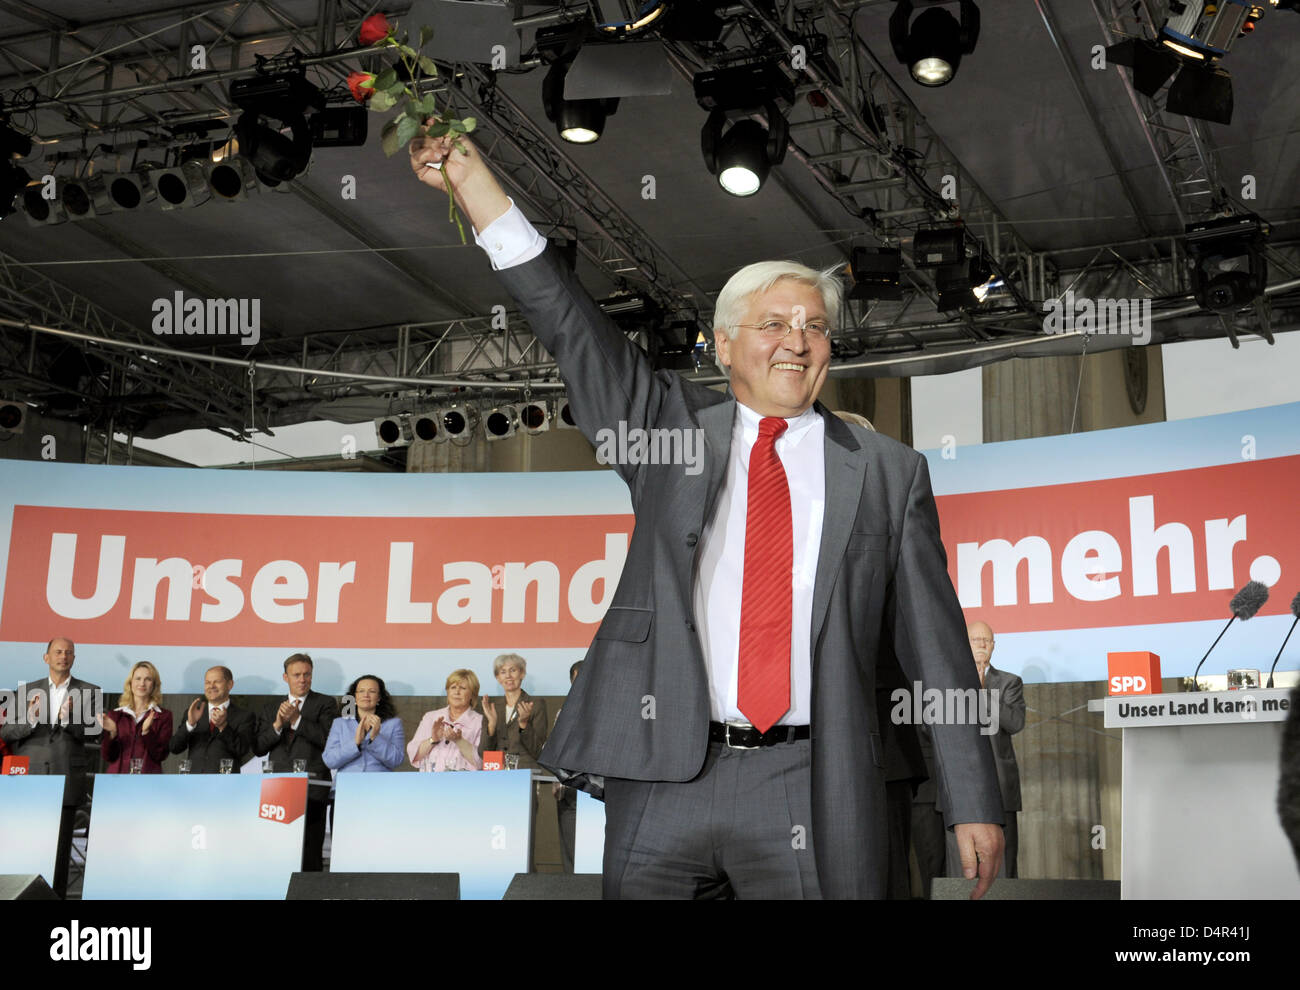 Frank-Walter Steinmeier, German Foreign Minister and top candidate for Social Democrats (SPD), gestures during an SPD election campaign event in Berlin, Germany, 25 September 2009. Federal elections are held on 27 September 2009. Photo: RAINER JENSEN Stock Photo